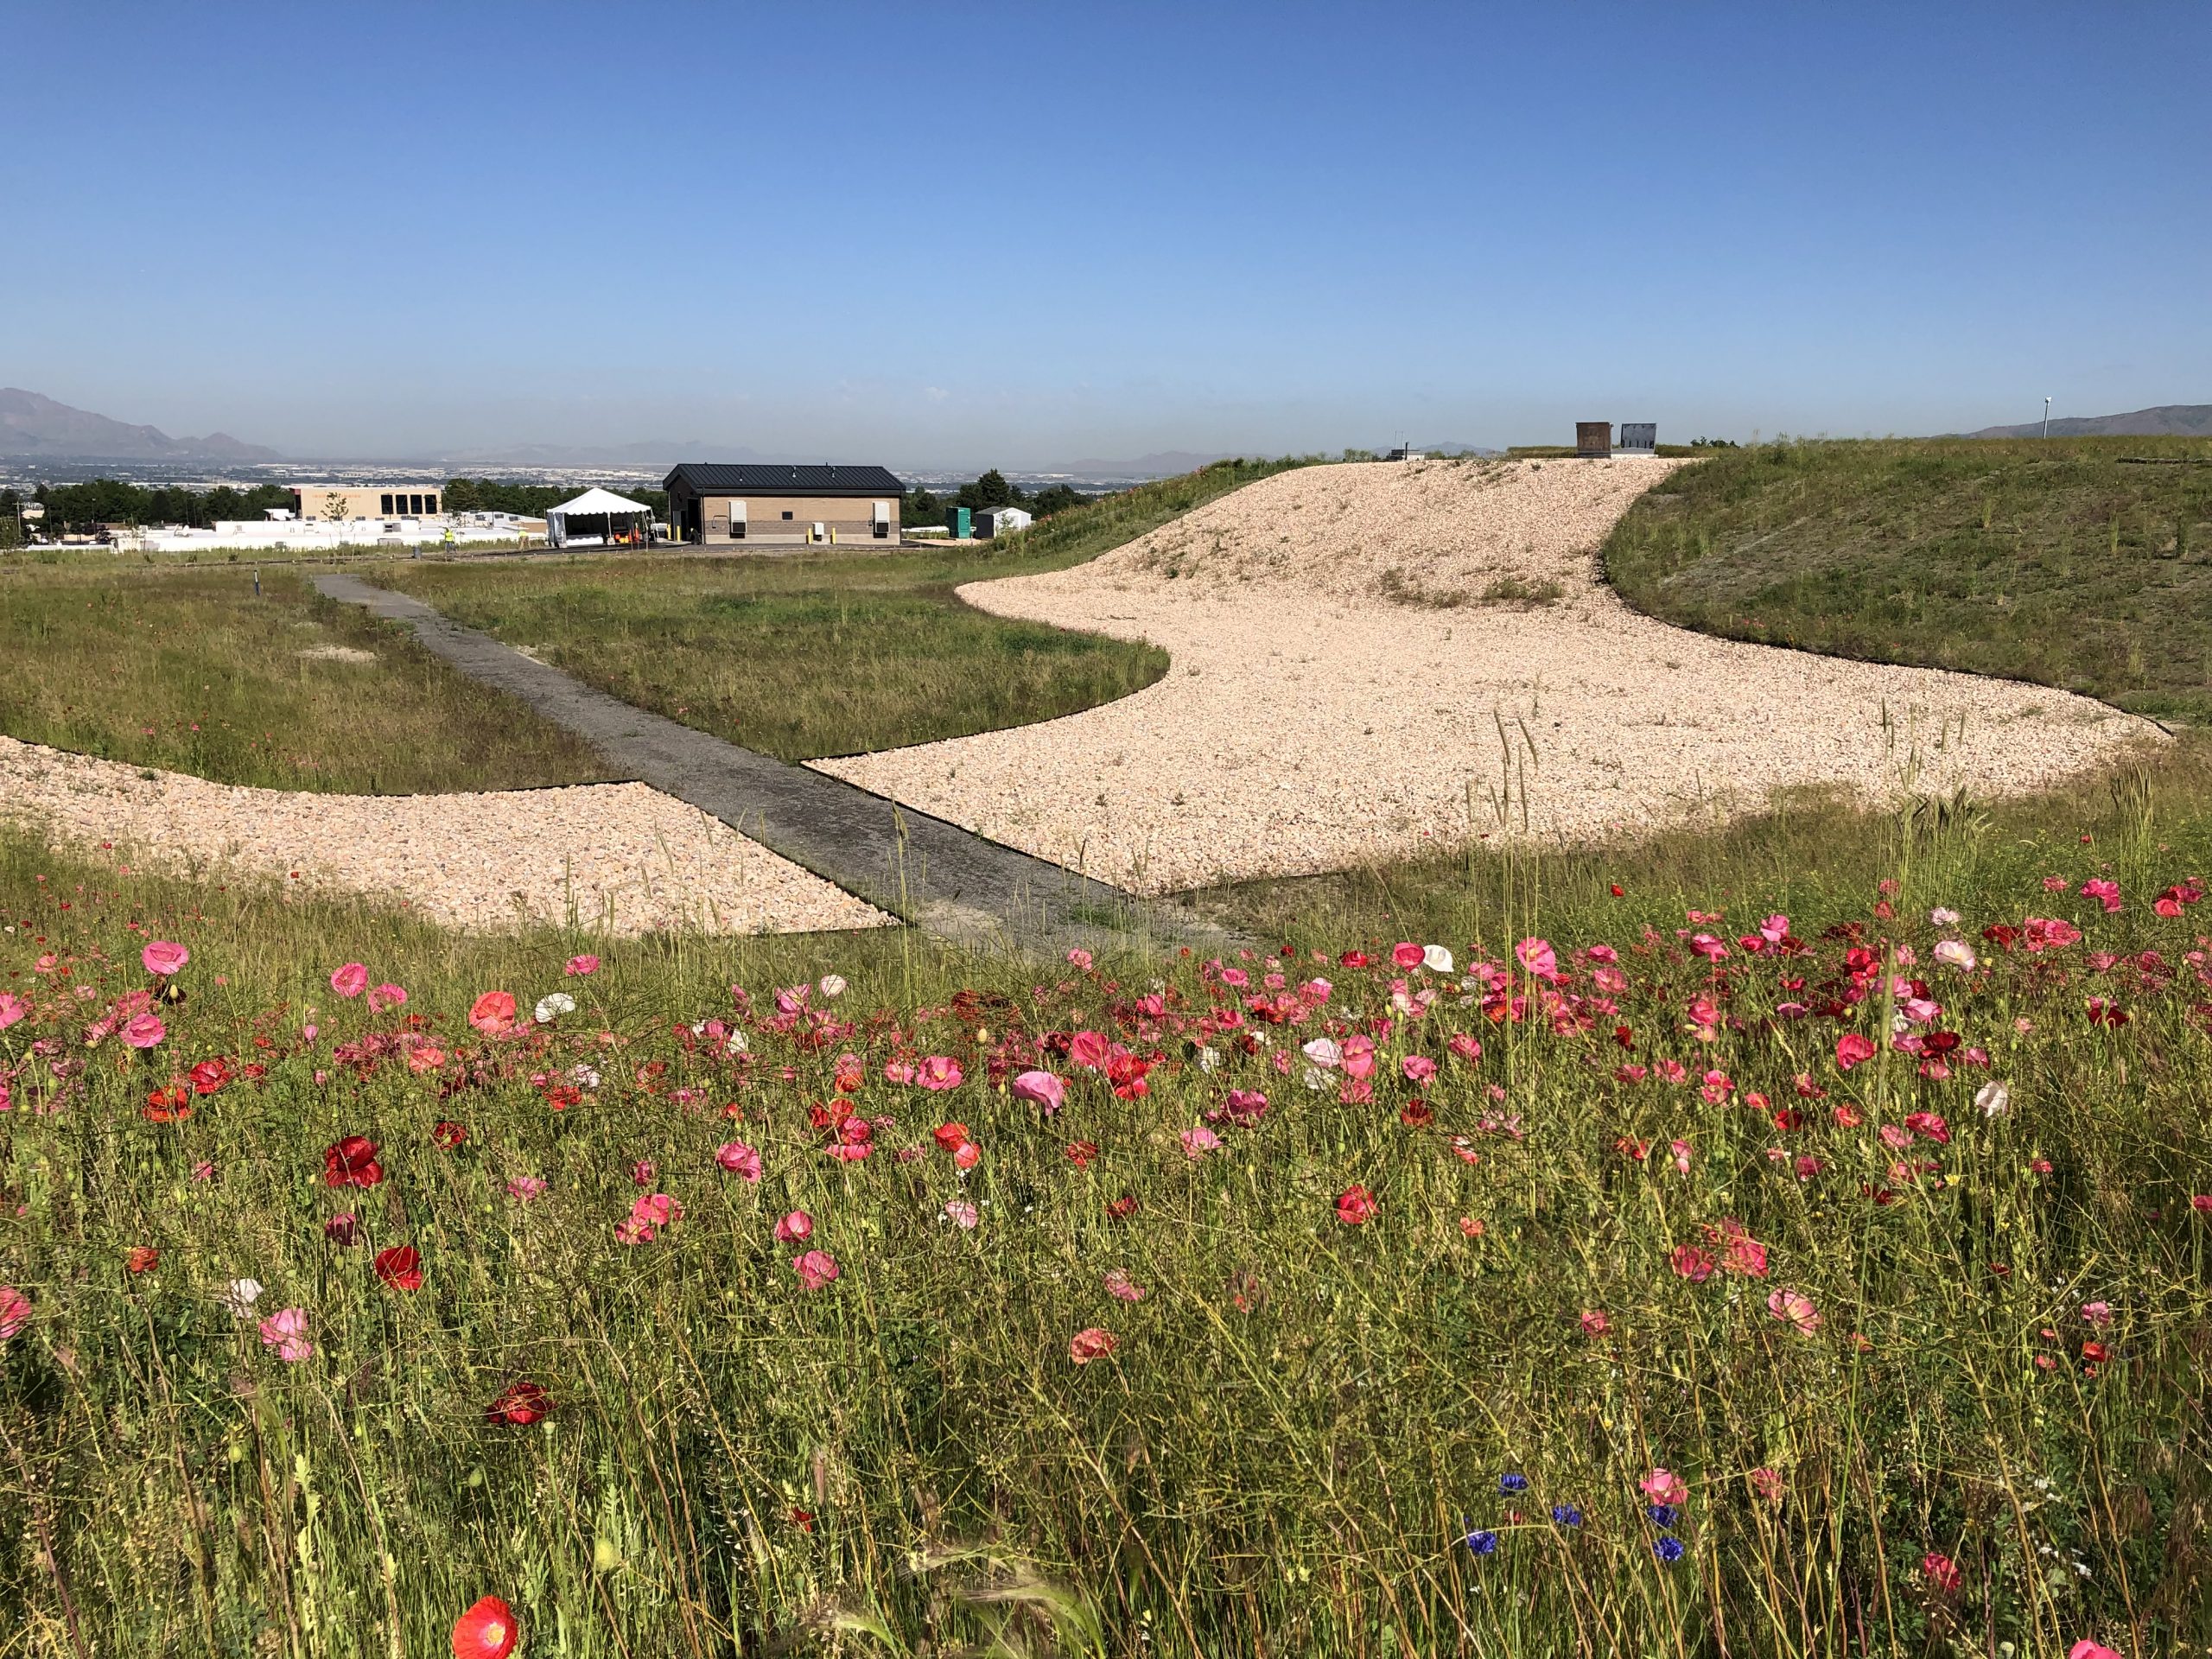 Landscaped area of the Terminal Reservoir with grass, rocks, and pink flowers.